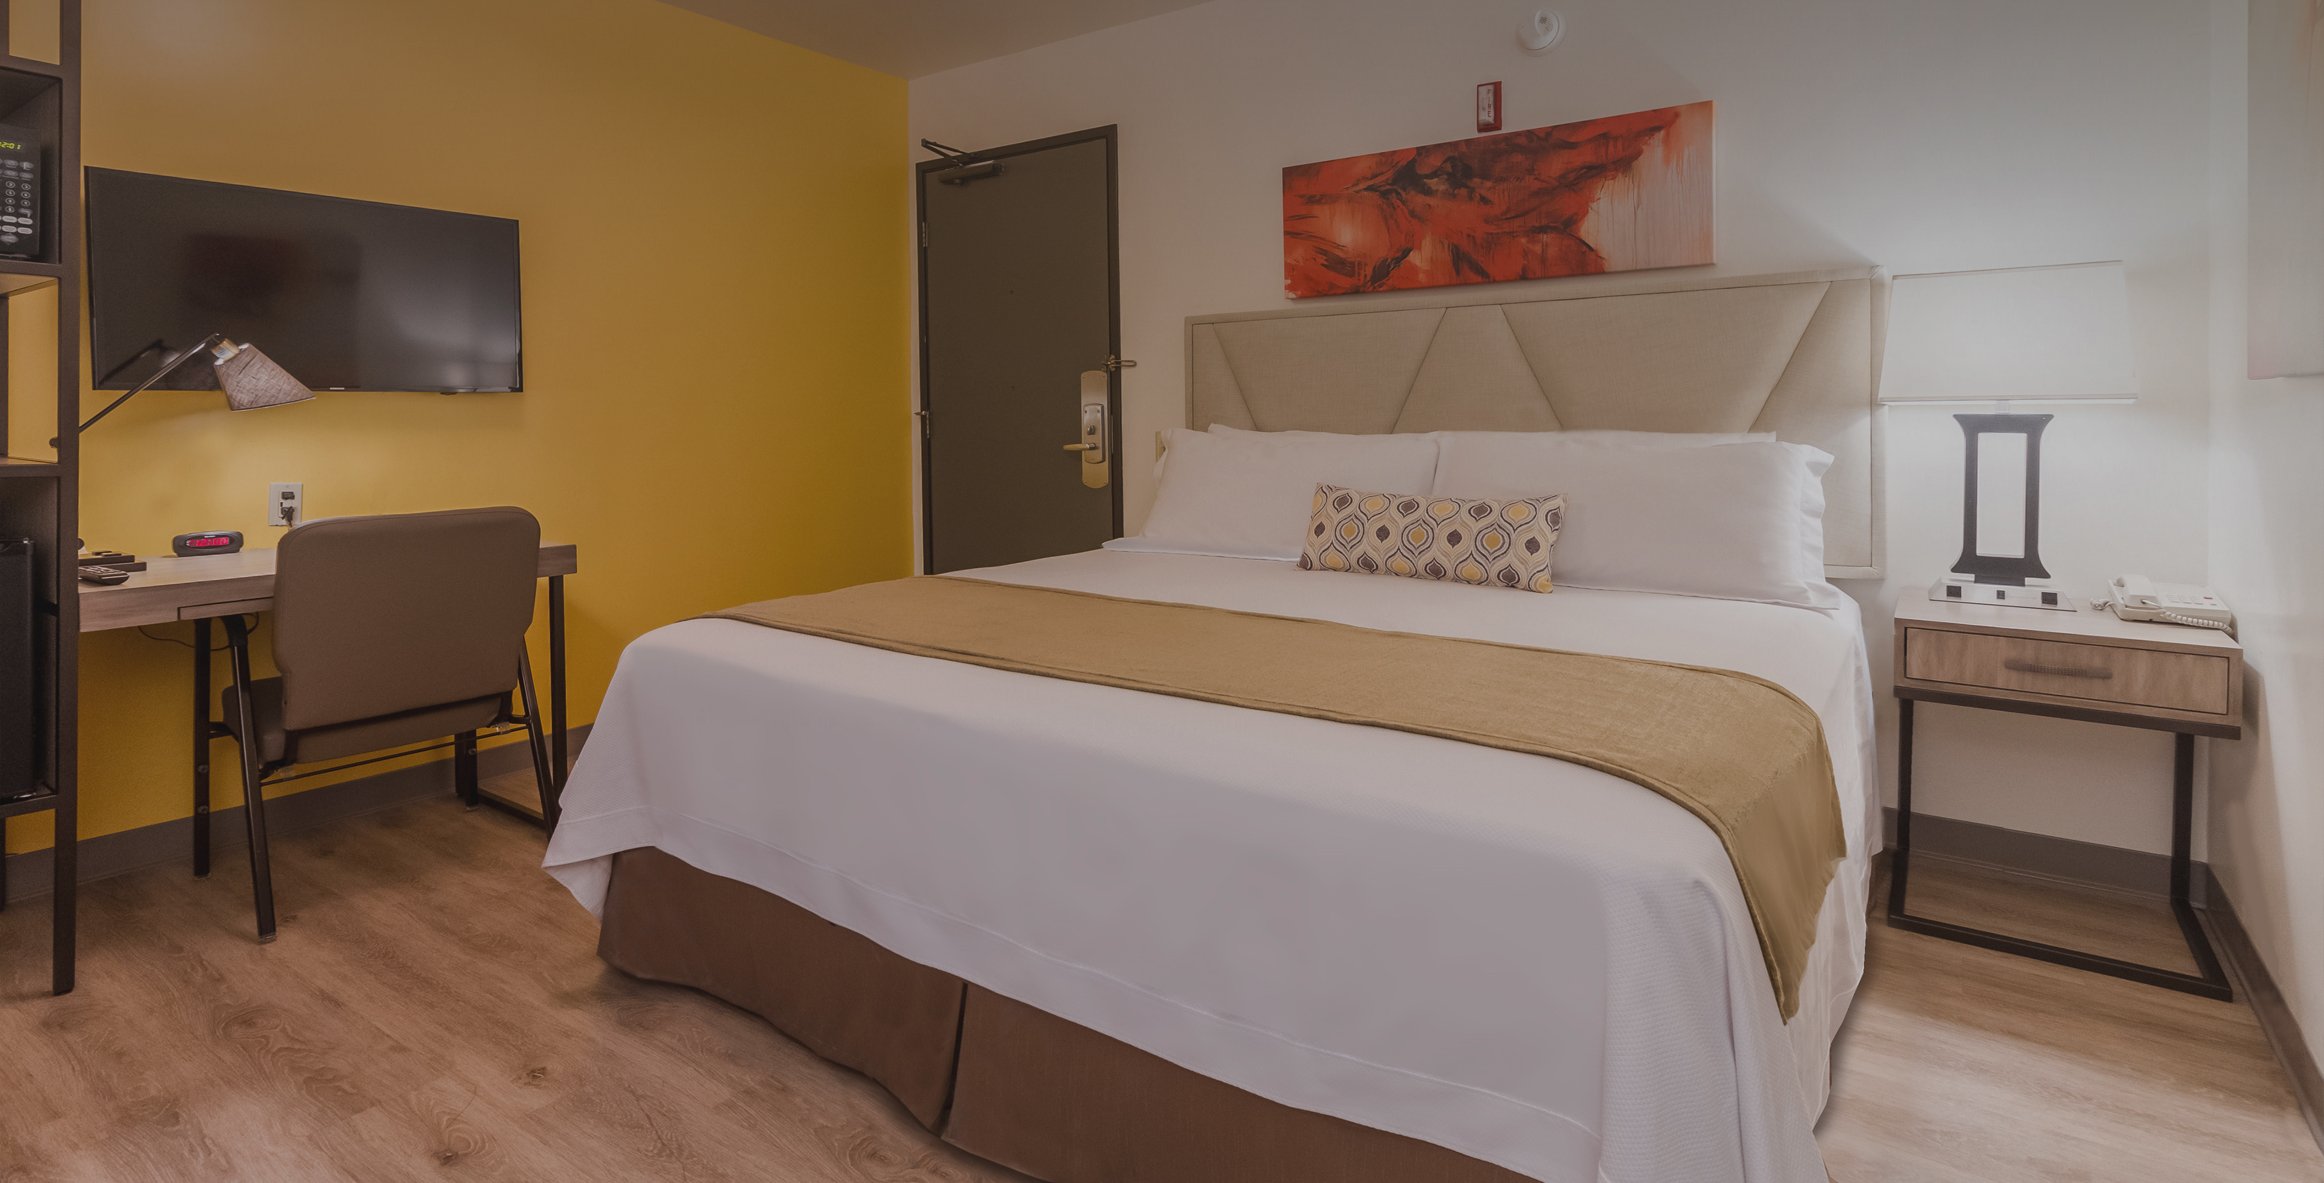 STAY IN OUR NEWLY REMODELED DTLA HOTEL ROOMS